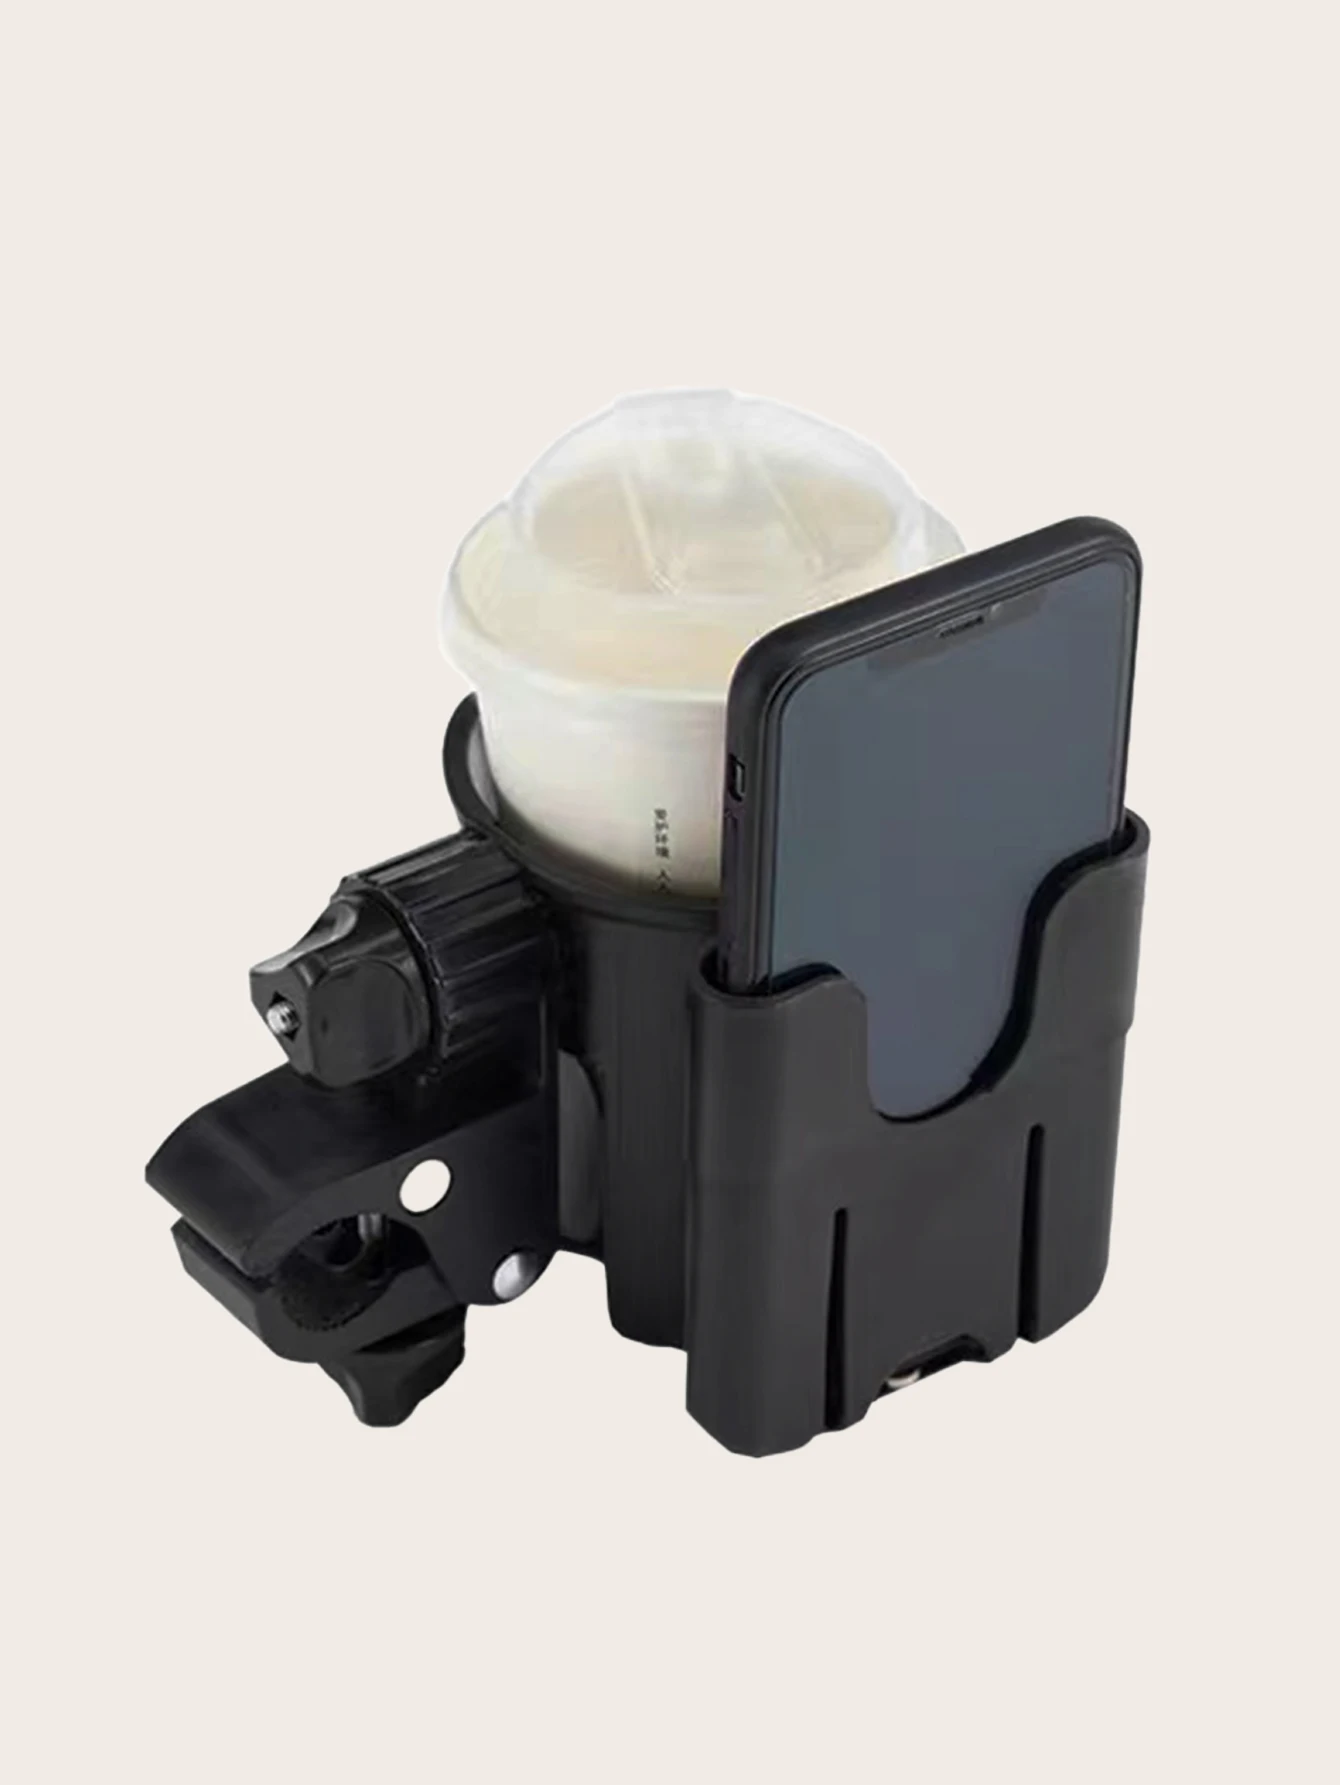 Baby Stroller Accessori Coffee Holder For Stroller Holder Cups And Mobile Accessori For Stroller Cup Phone Holder